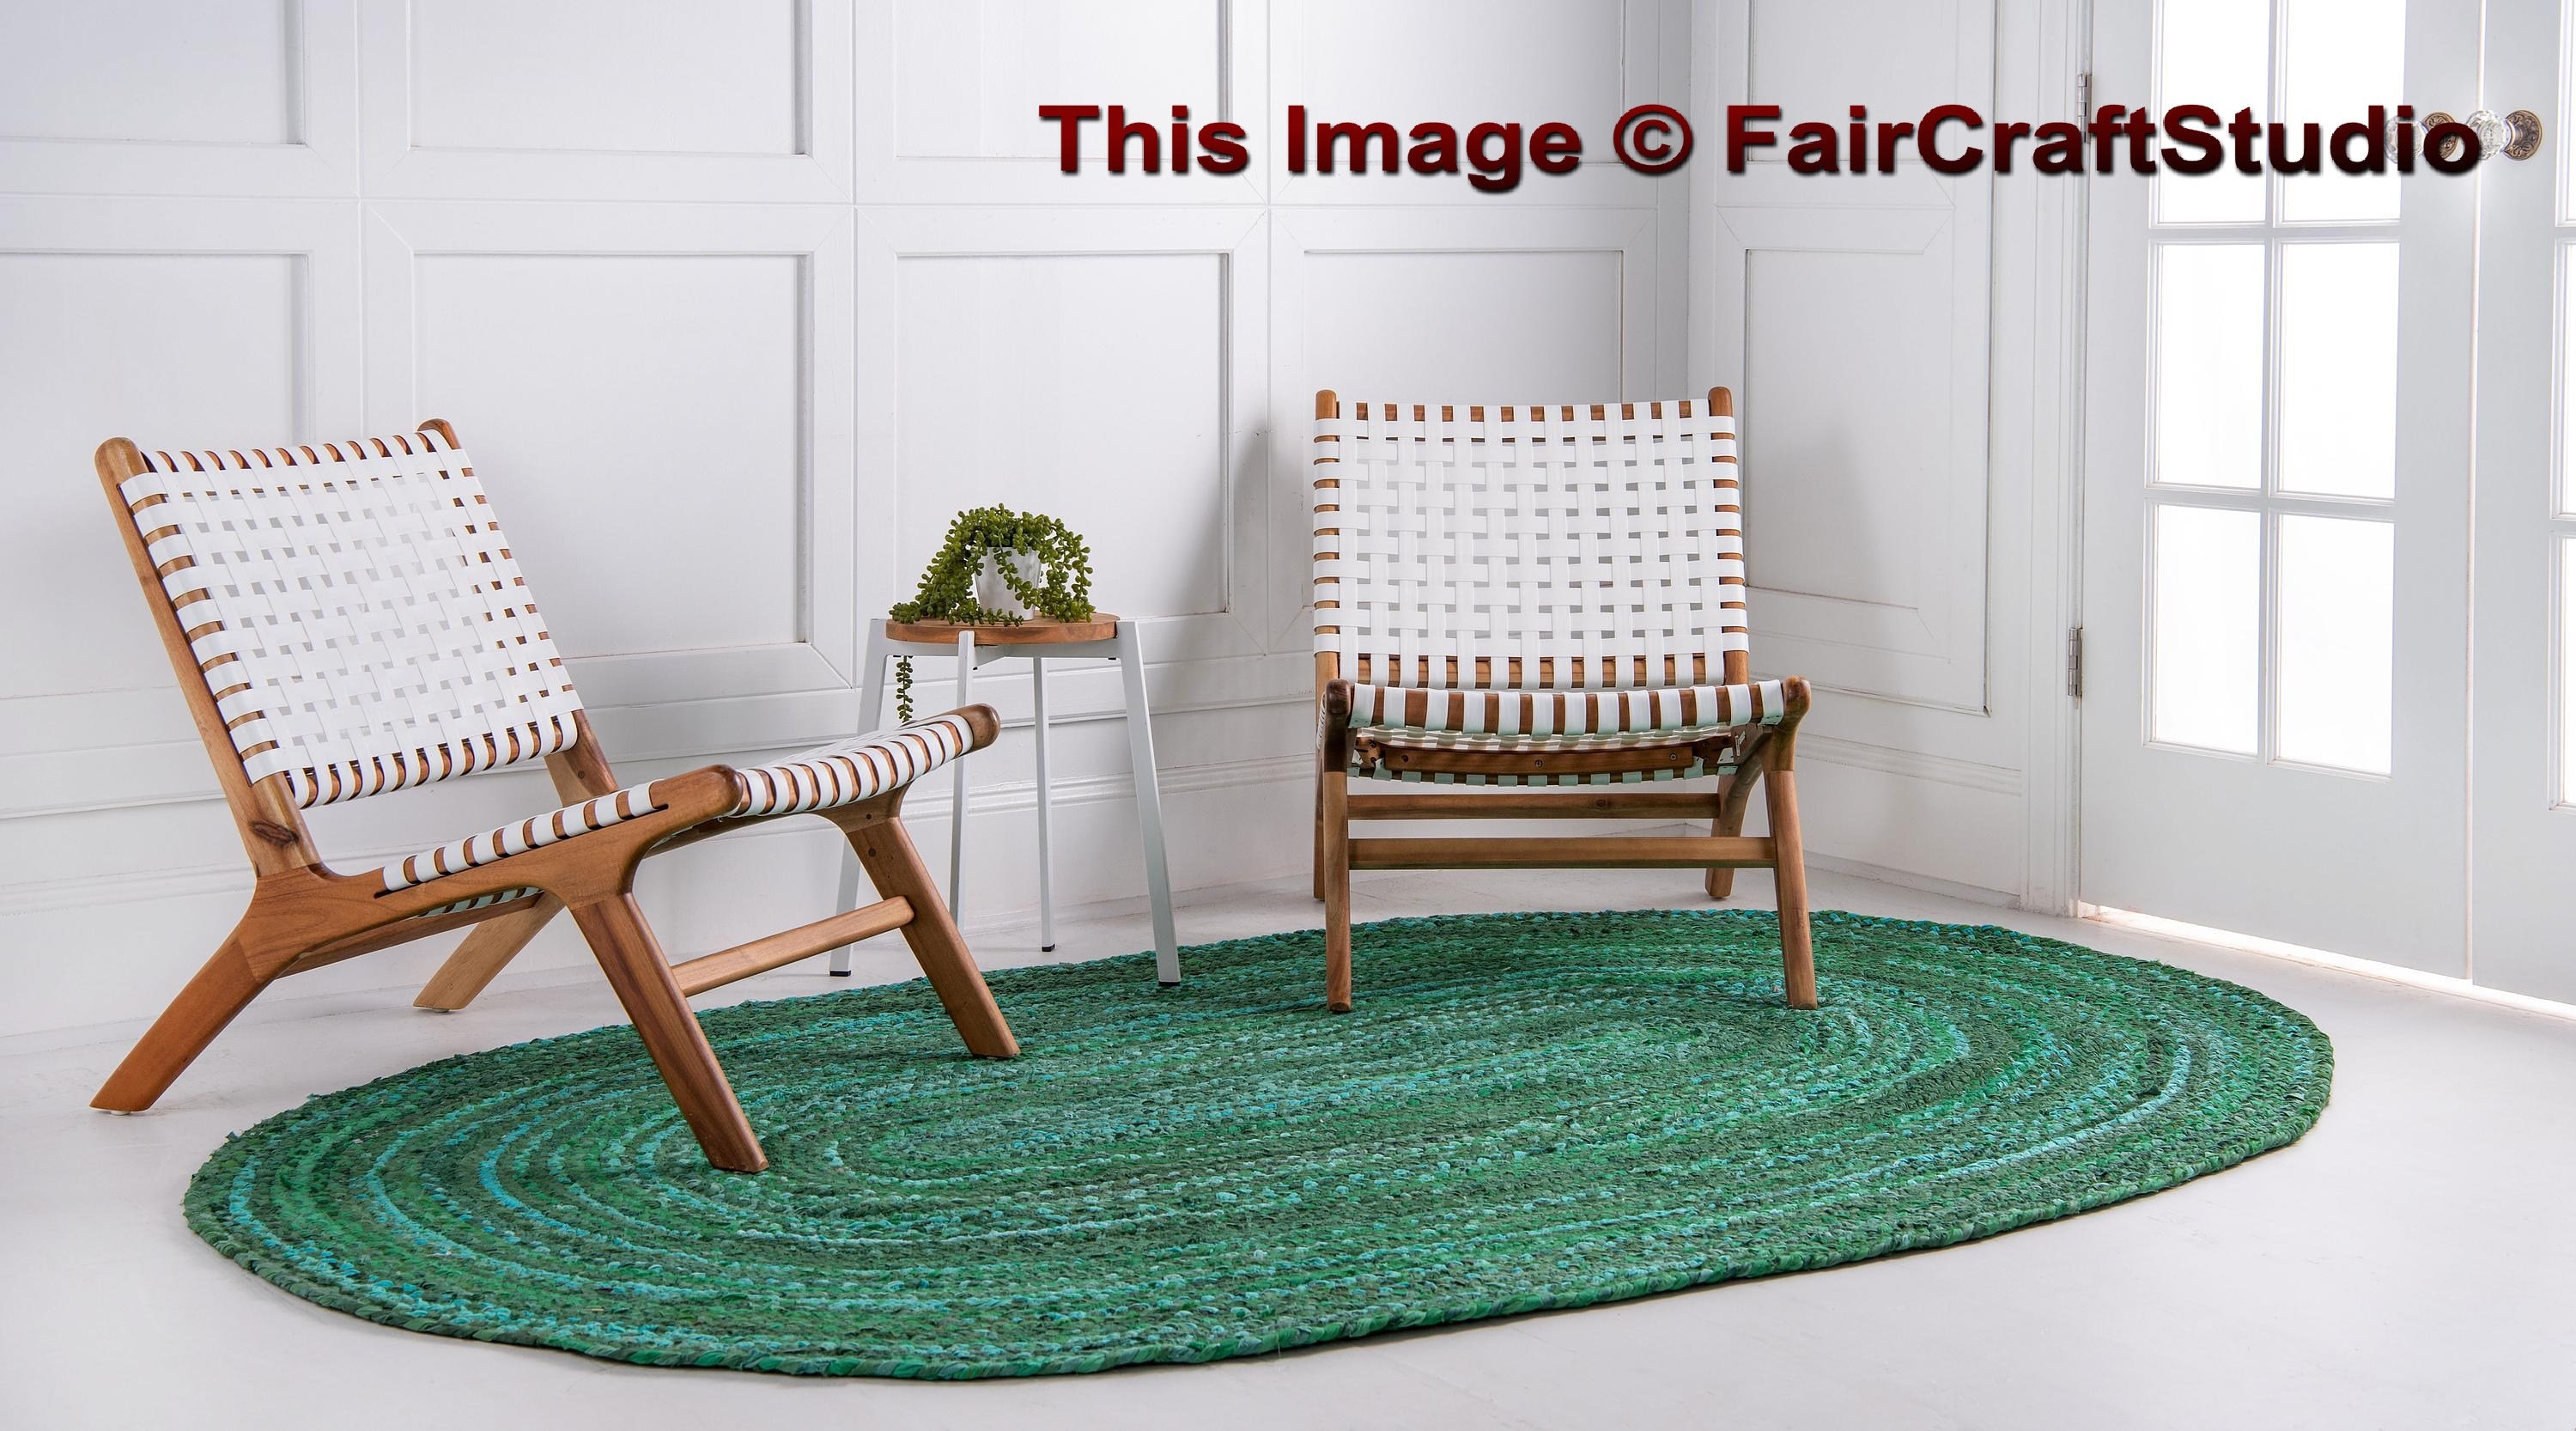 Oval Area Rugs For Living Room